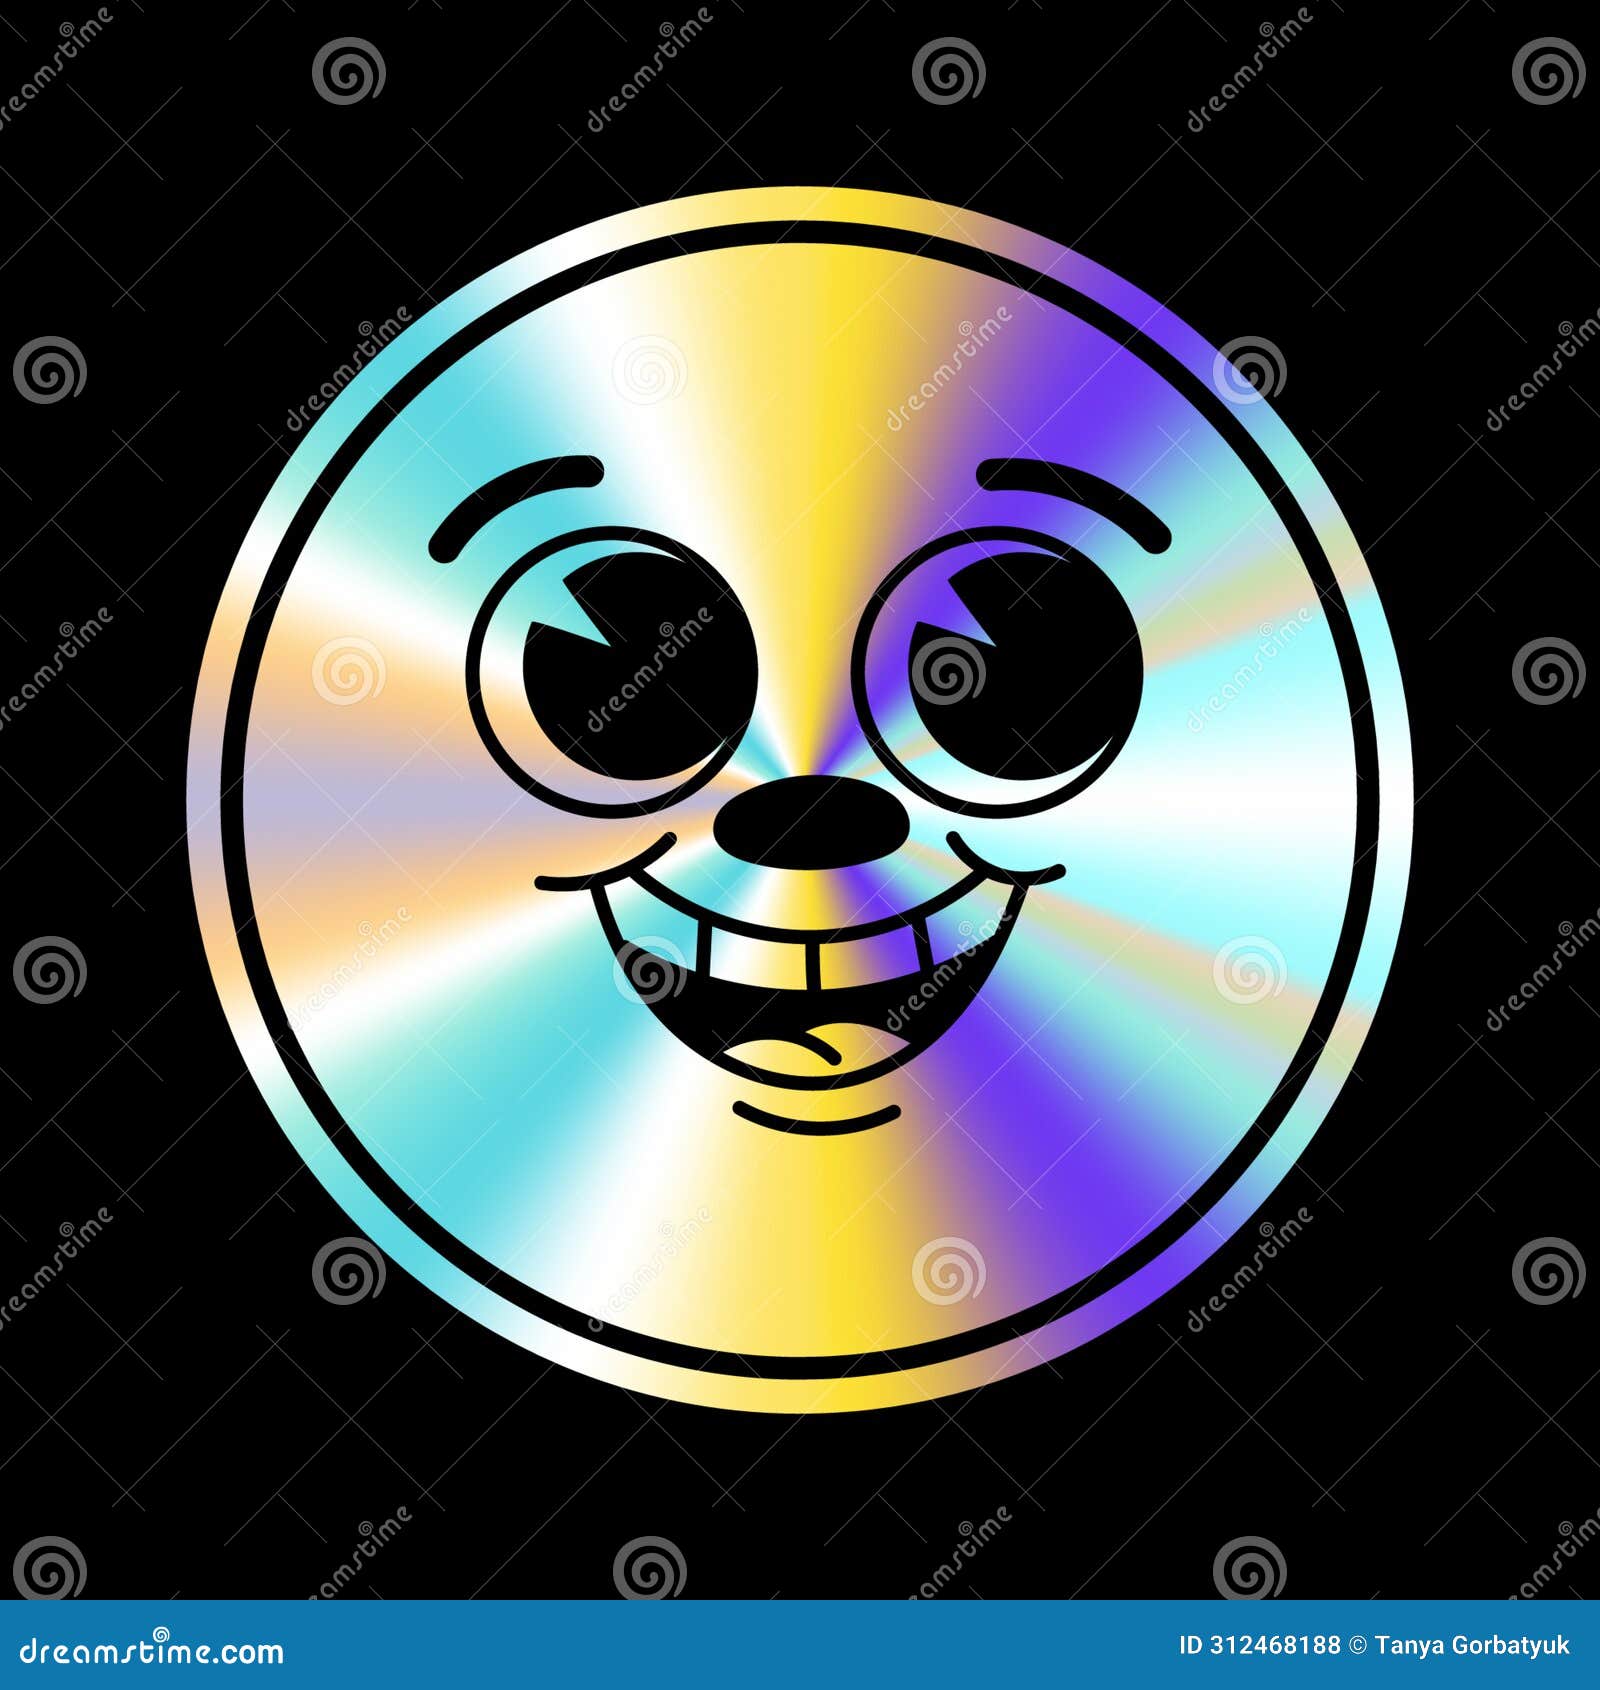 holographic sticker with cartoon face in a trendy retro y2k style.